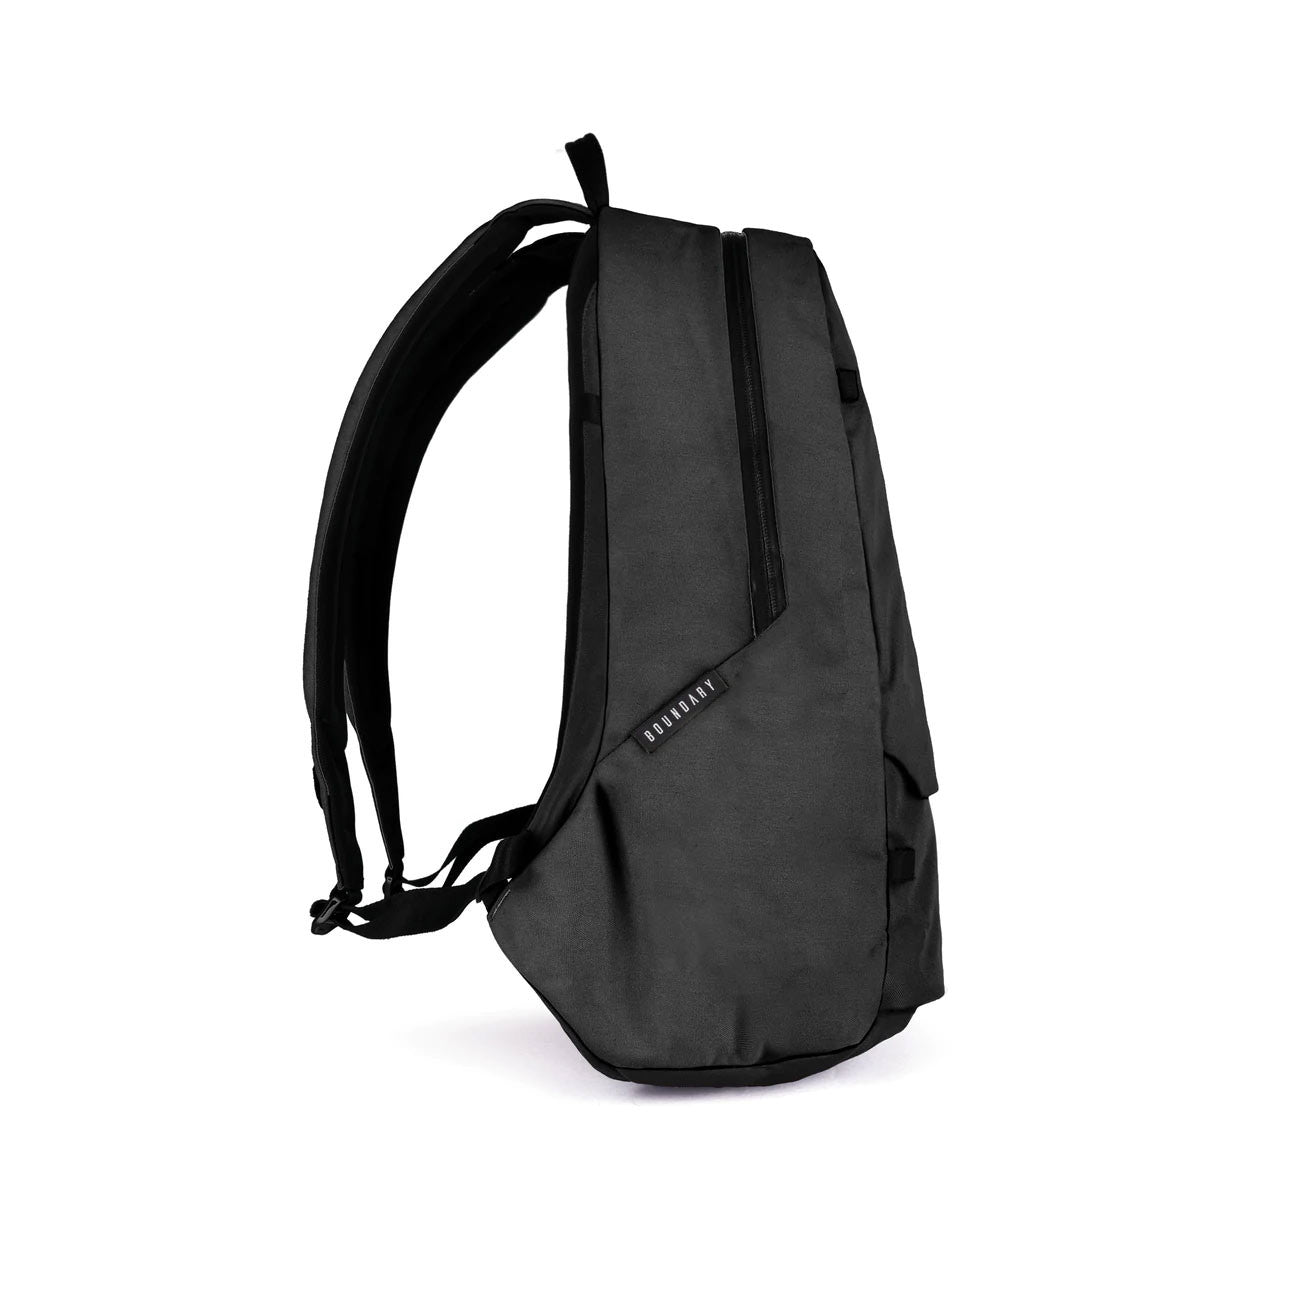 Rennen Daypack Black side recycled fabric